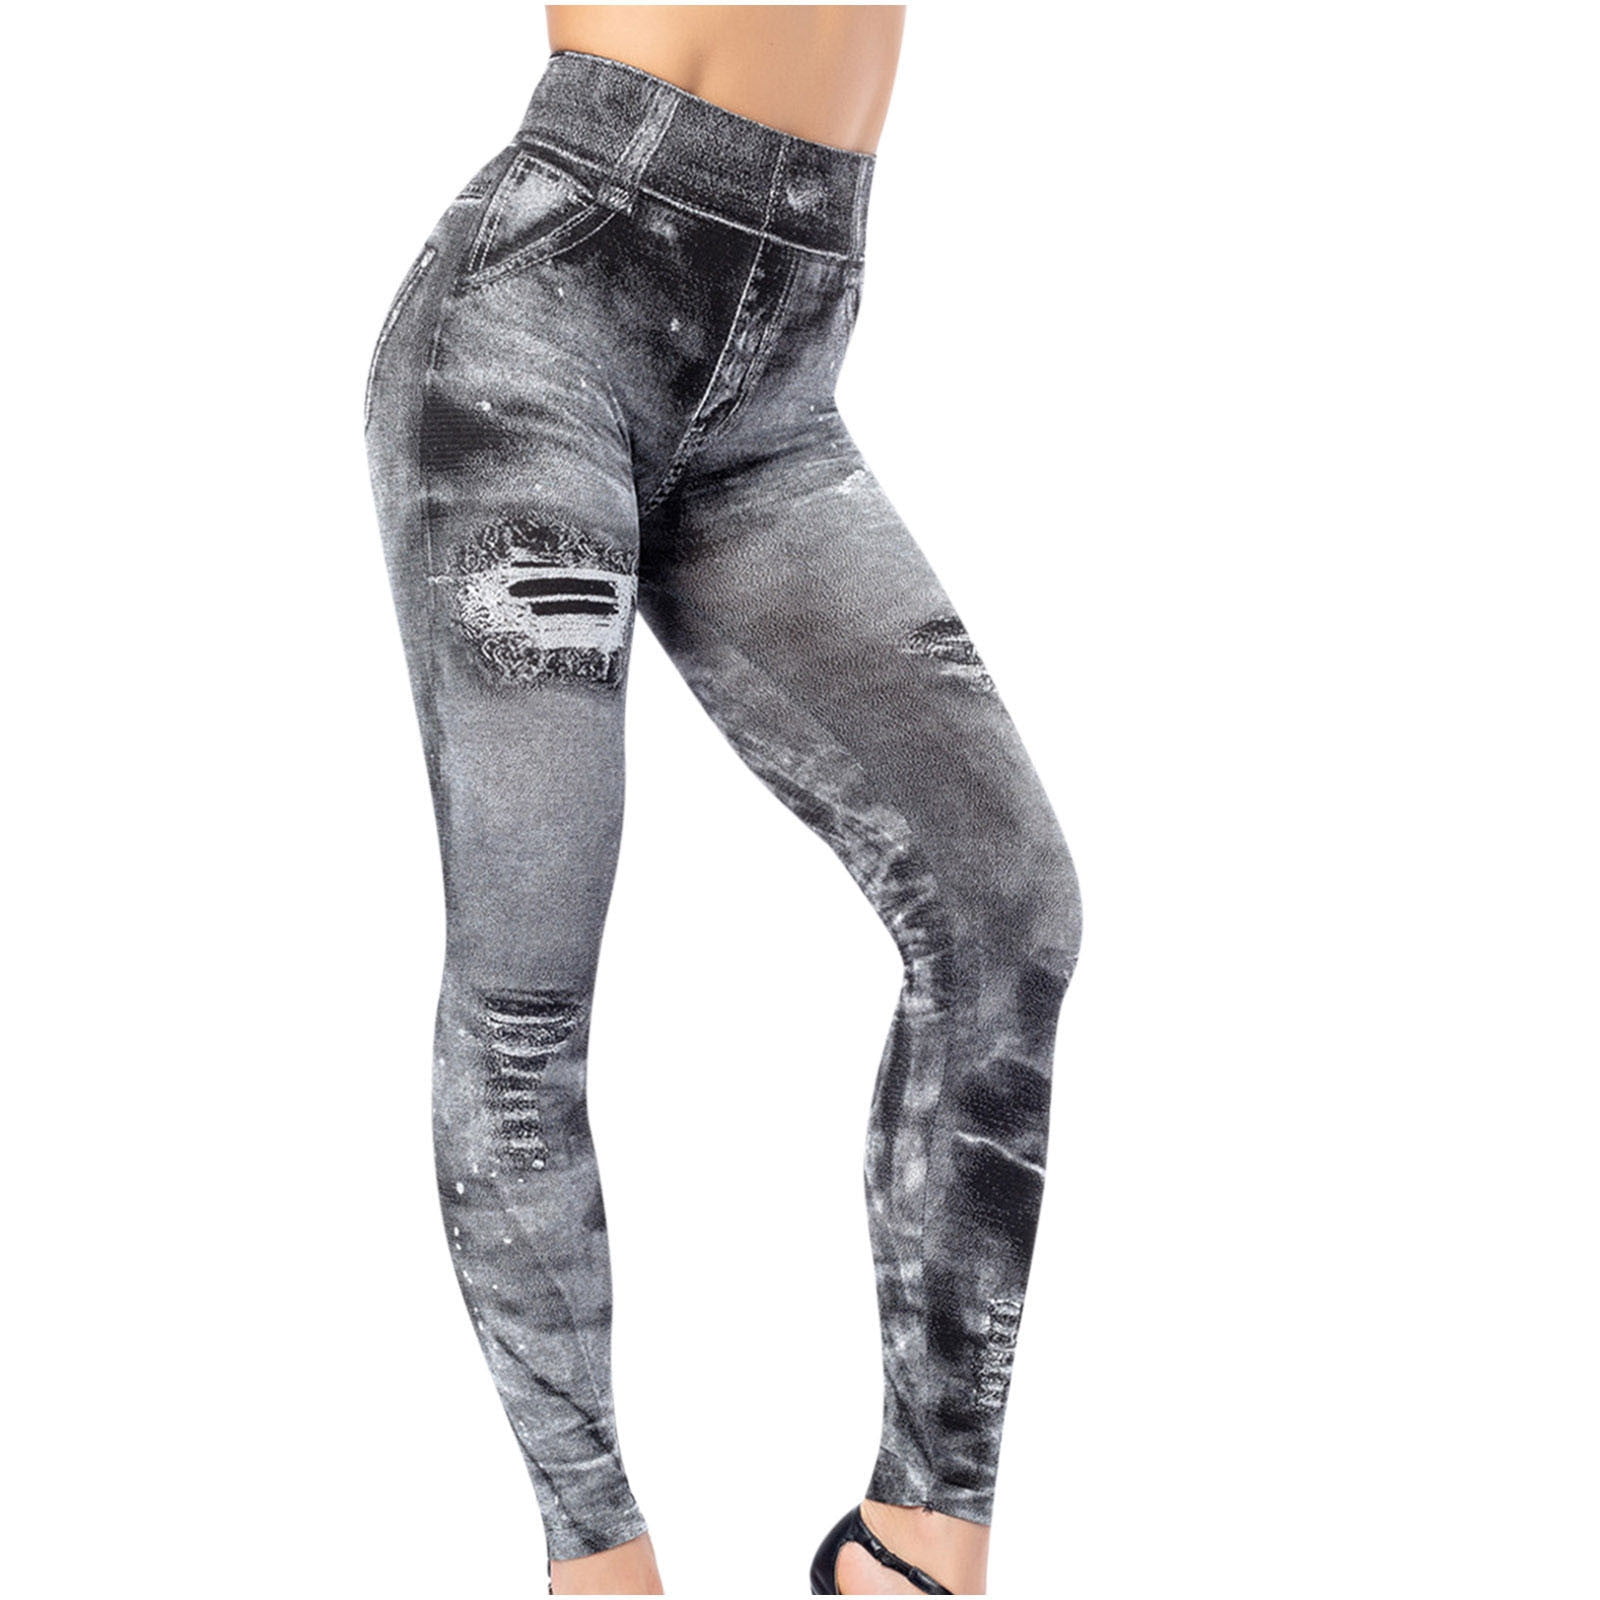 YYDGH Leggings for Women Distressed Ripped Denim Jeggings High Waist Tummy  Control Yoga Pants Stretchy Skinny Jeans Tights Gray S